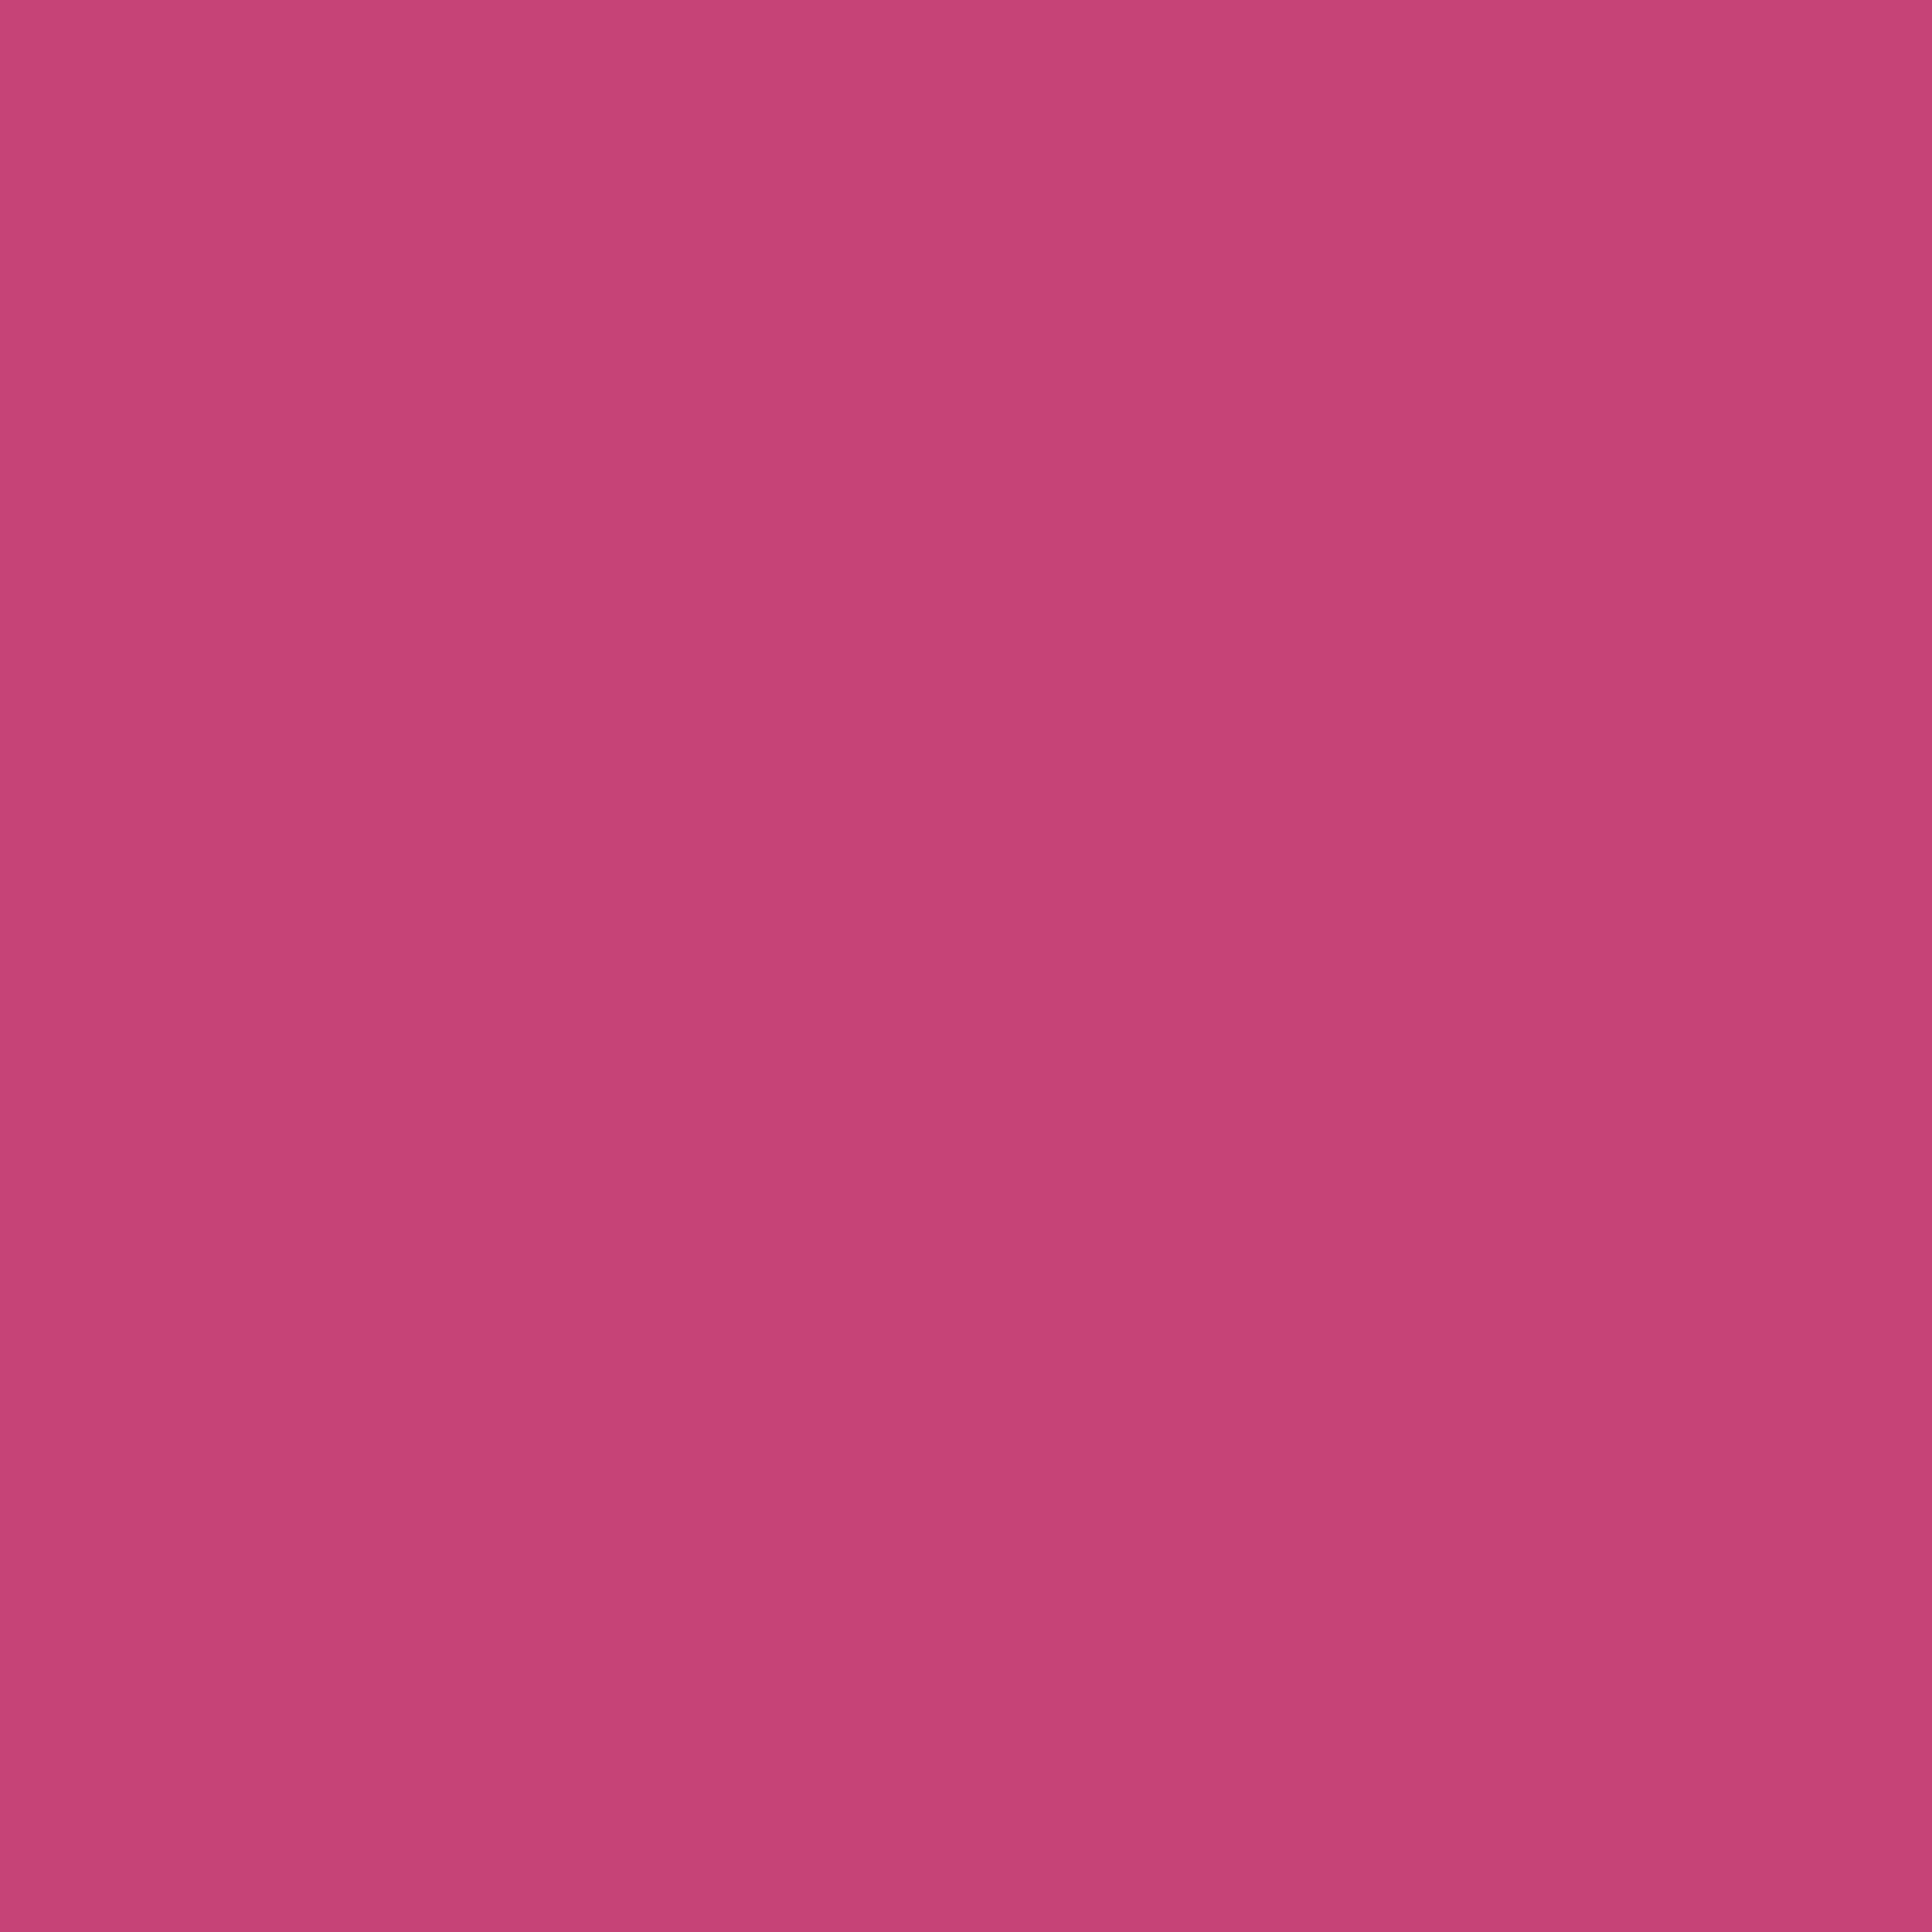 3600x3600 Fuchsia Rose Solid Color Background